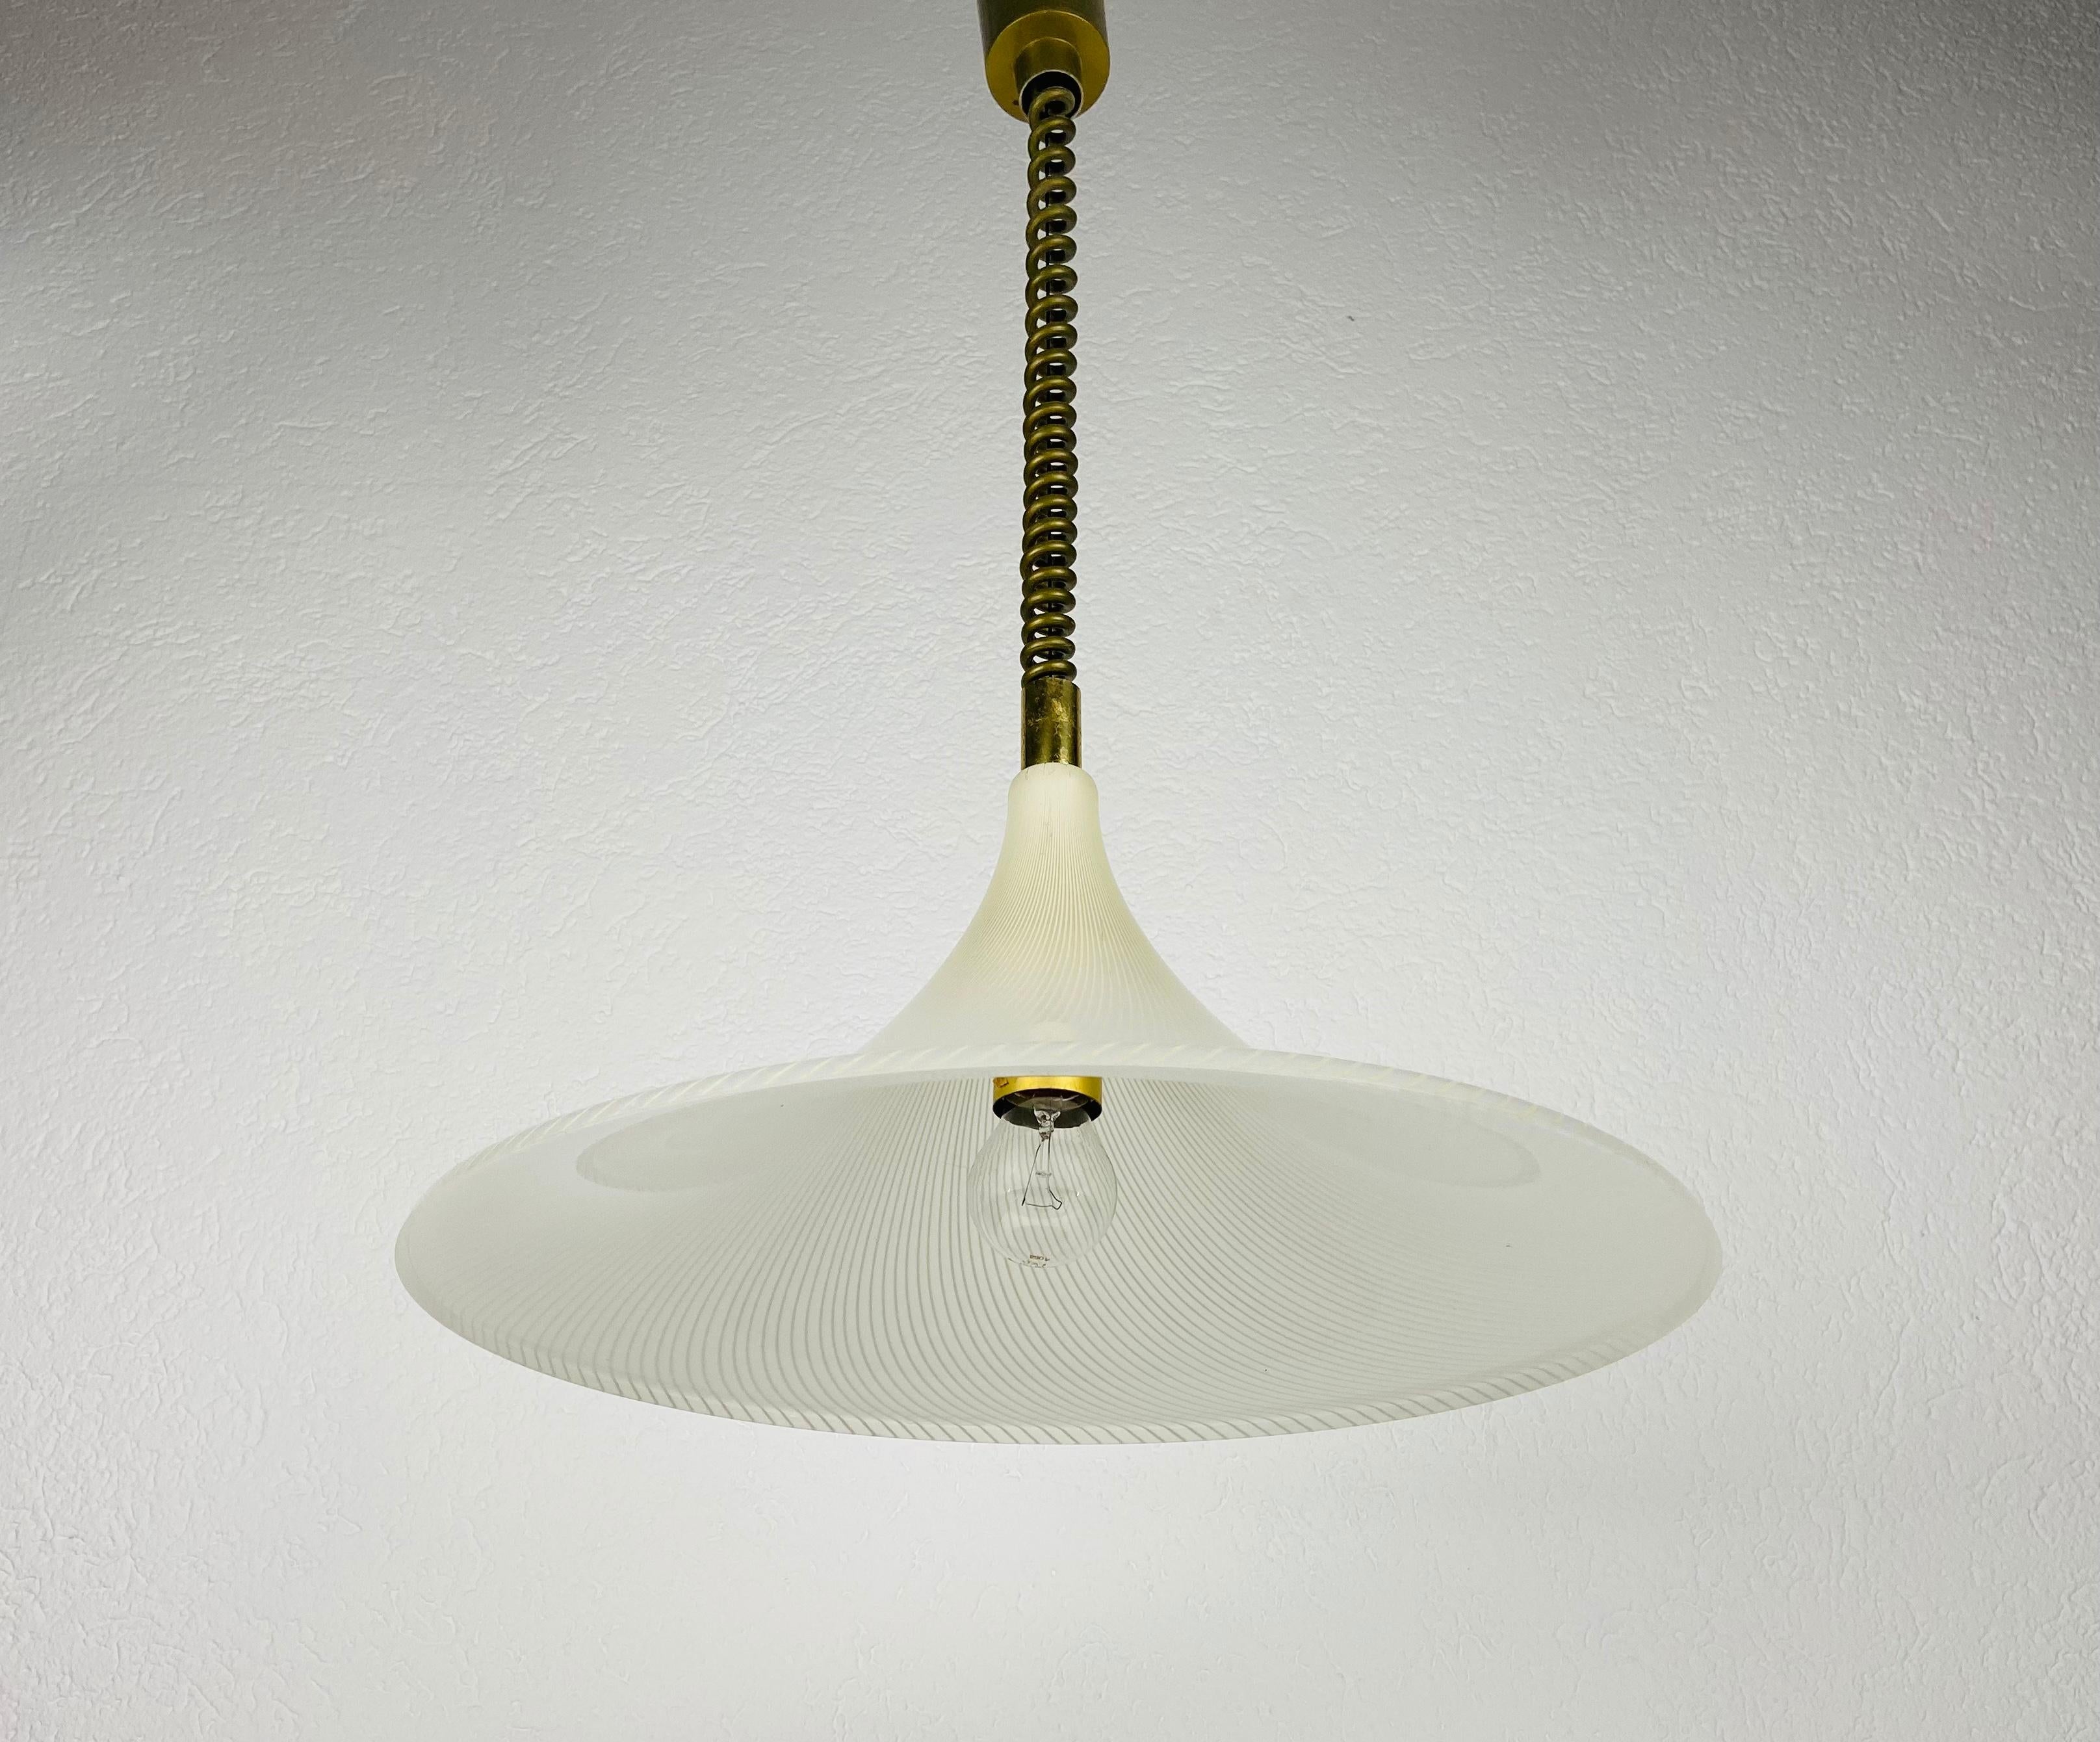 Mid-Century Modern plexiglass pendant lamp made in the 1960s. The lamp is in good vintage condition.

Measure:

Diameter 45 cm 

Height 50 - 120 cm

The light requires one E27 (US E26) light bulb. Works with both 120/220V.

Free worldwide